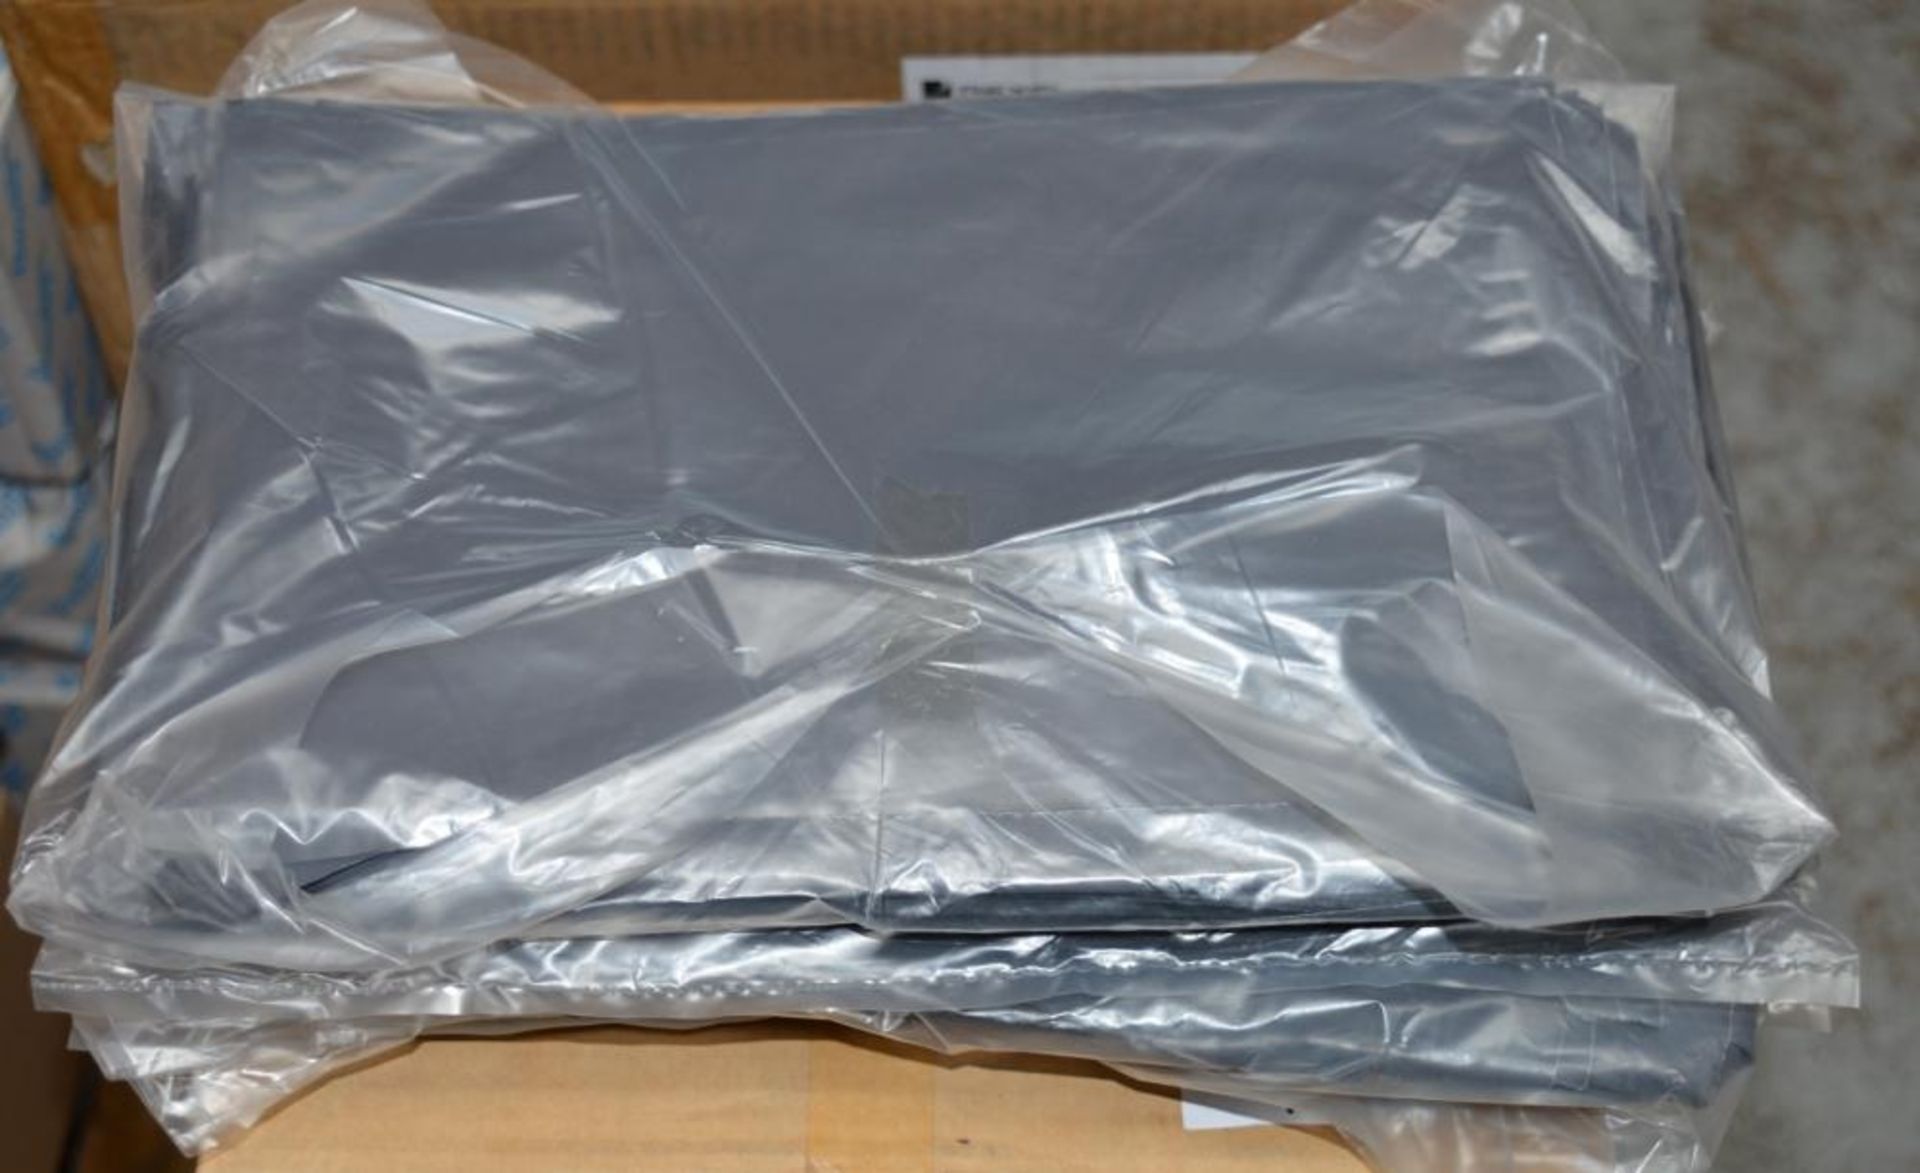 500 x Polythene Postal Mailing Bags - Grey Coloured - Size 25 x 16.5cm - Includes 5 x Packs of 100 - - Image 3 of 3